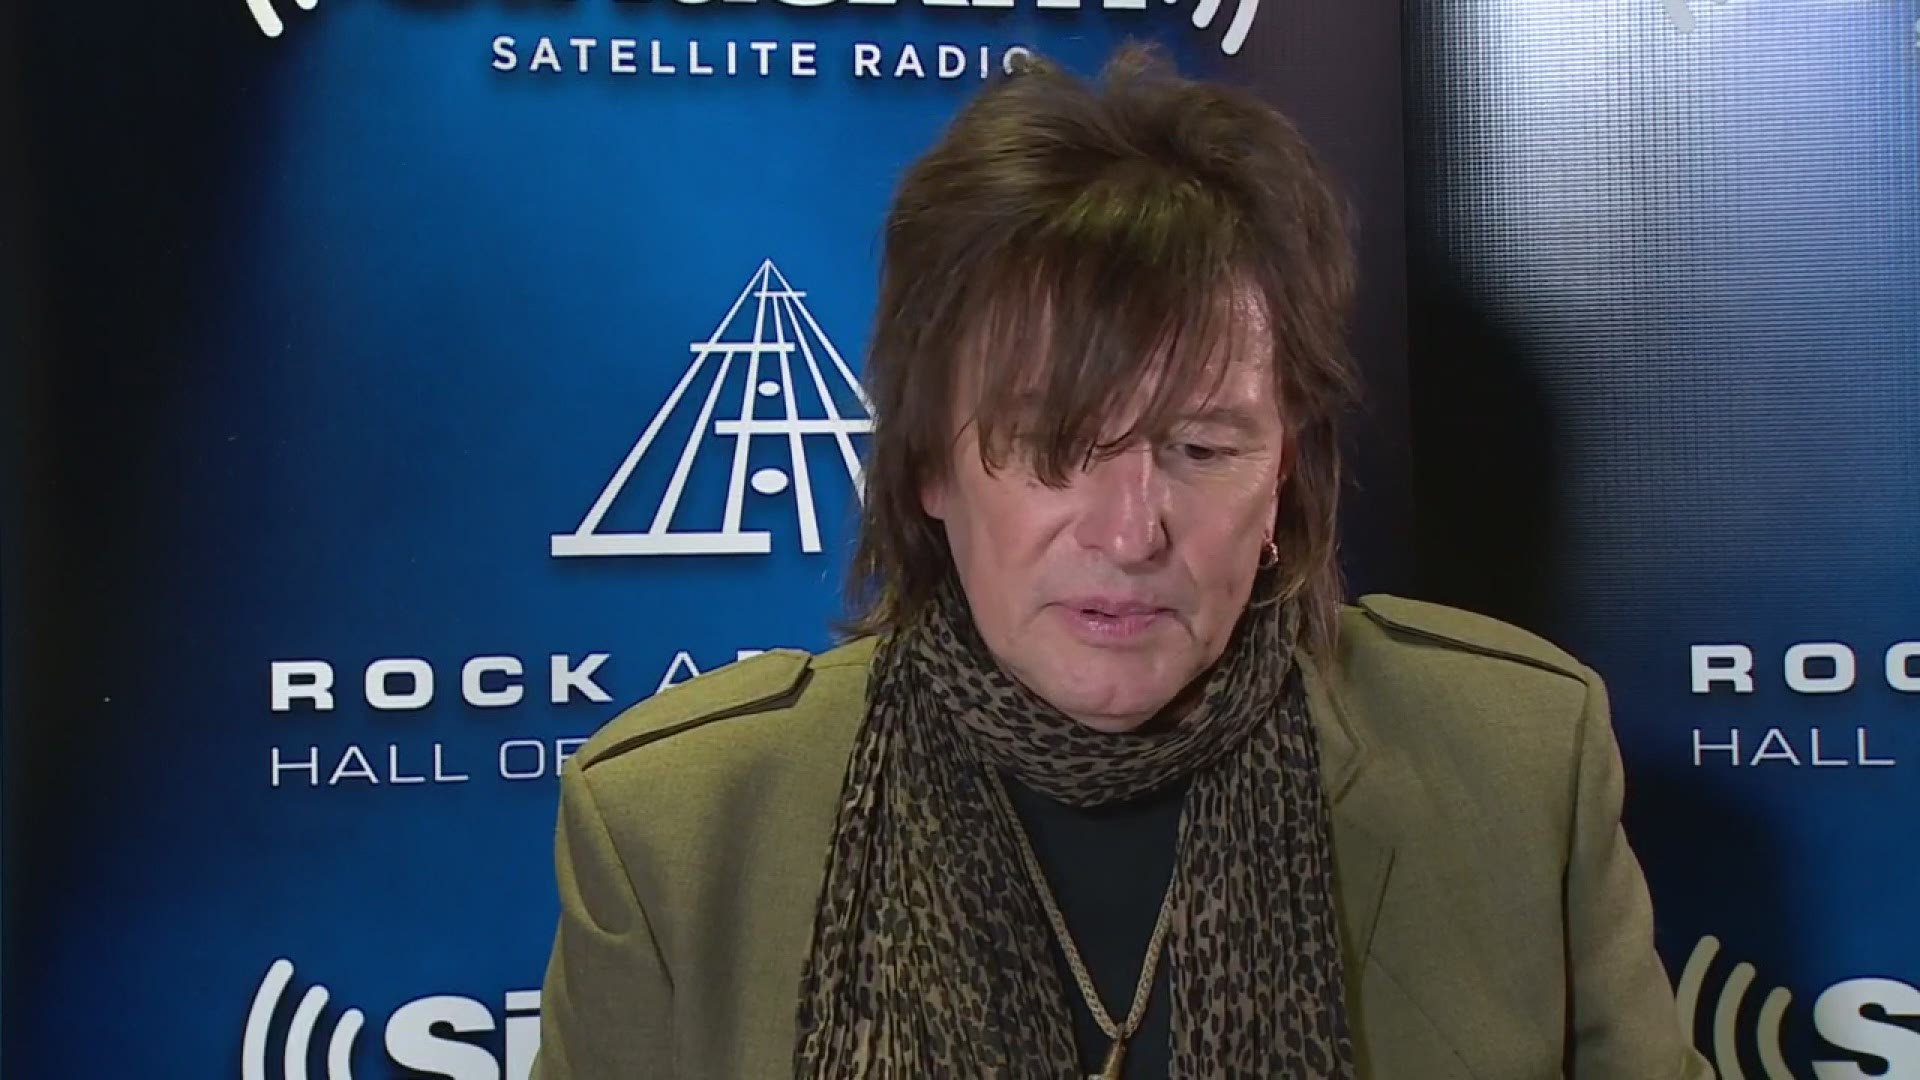 April 2018: WKYC sat down for an exclusive interview with Richie Sambora about his induction into the Rock and Roll Hall of Fame in Cleveland.